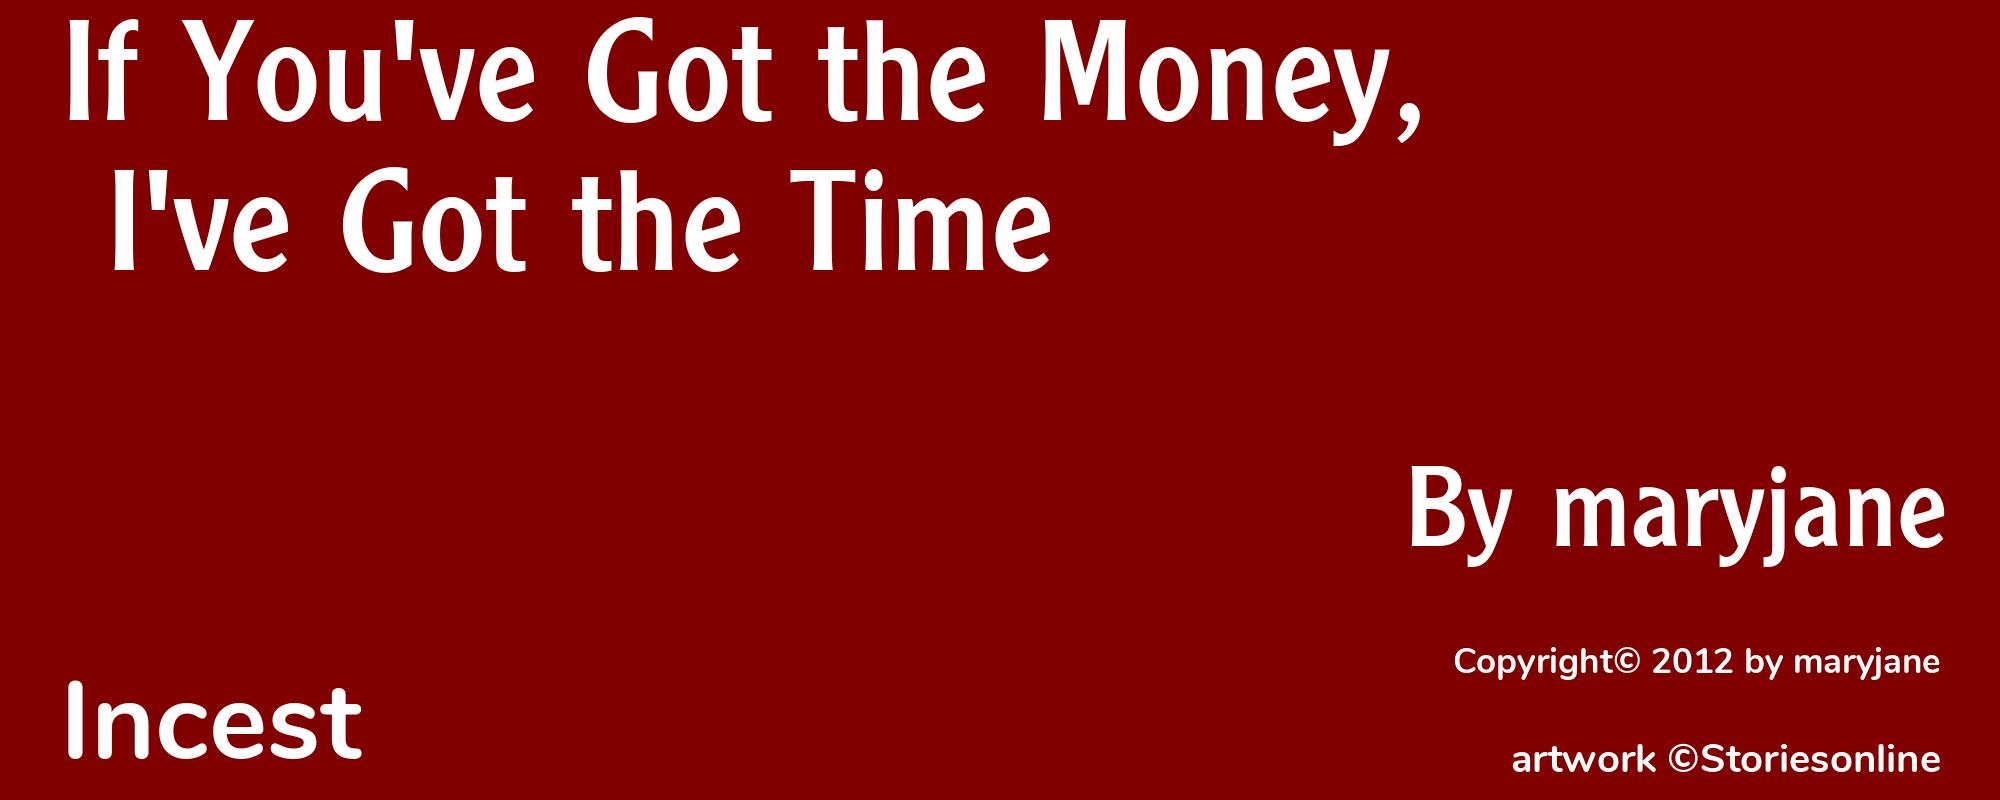 If You've Got the Money, I've Got the Time - Cover